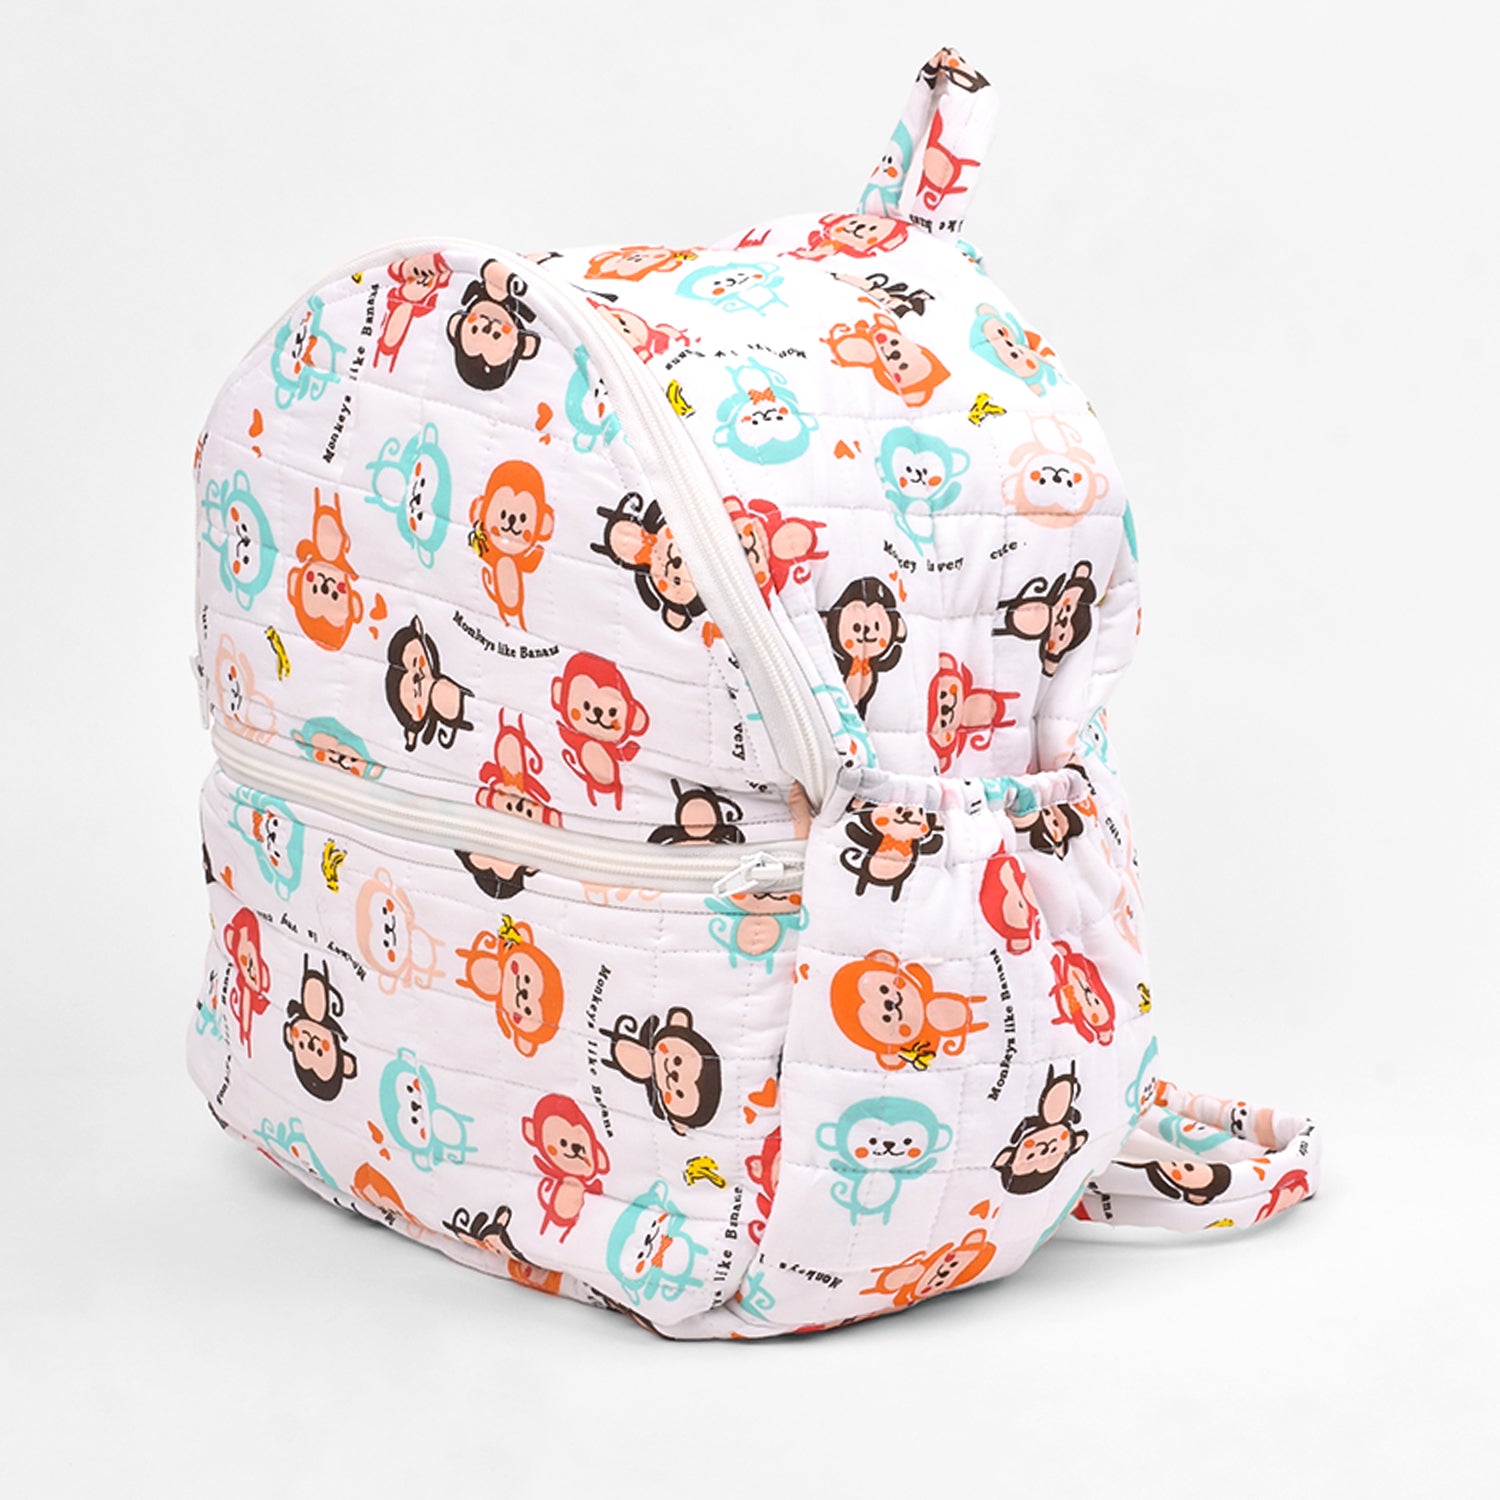 Baby Organic Cotton Muslin Travel Bag- Diaper Multipurpose Carry bags for Mothers- Monkey